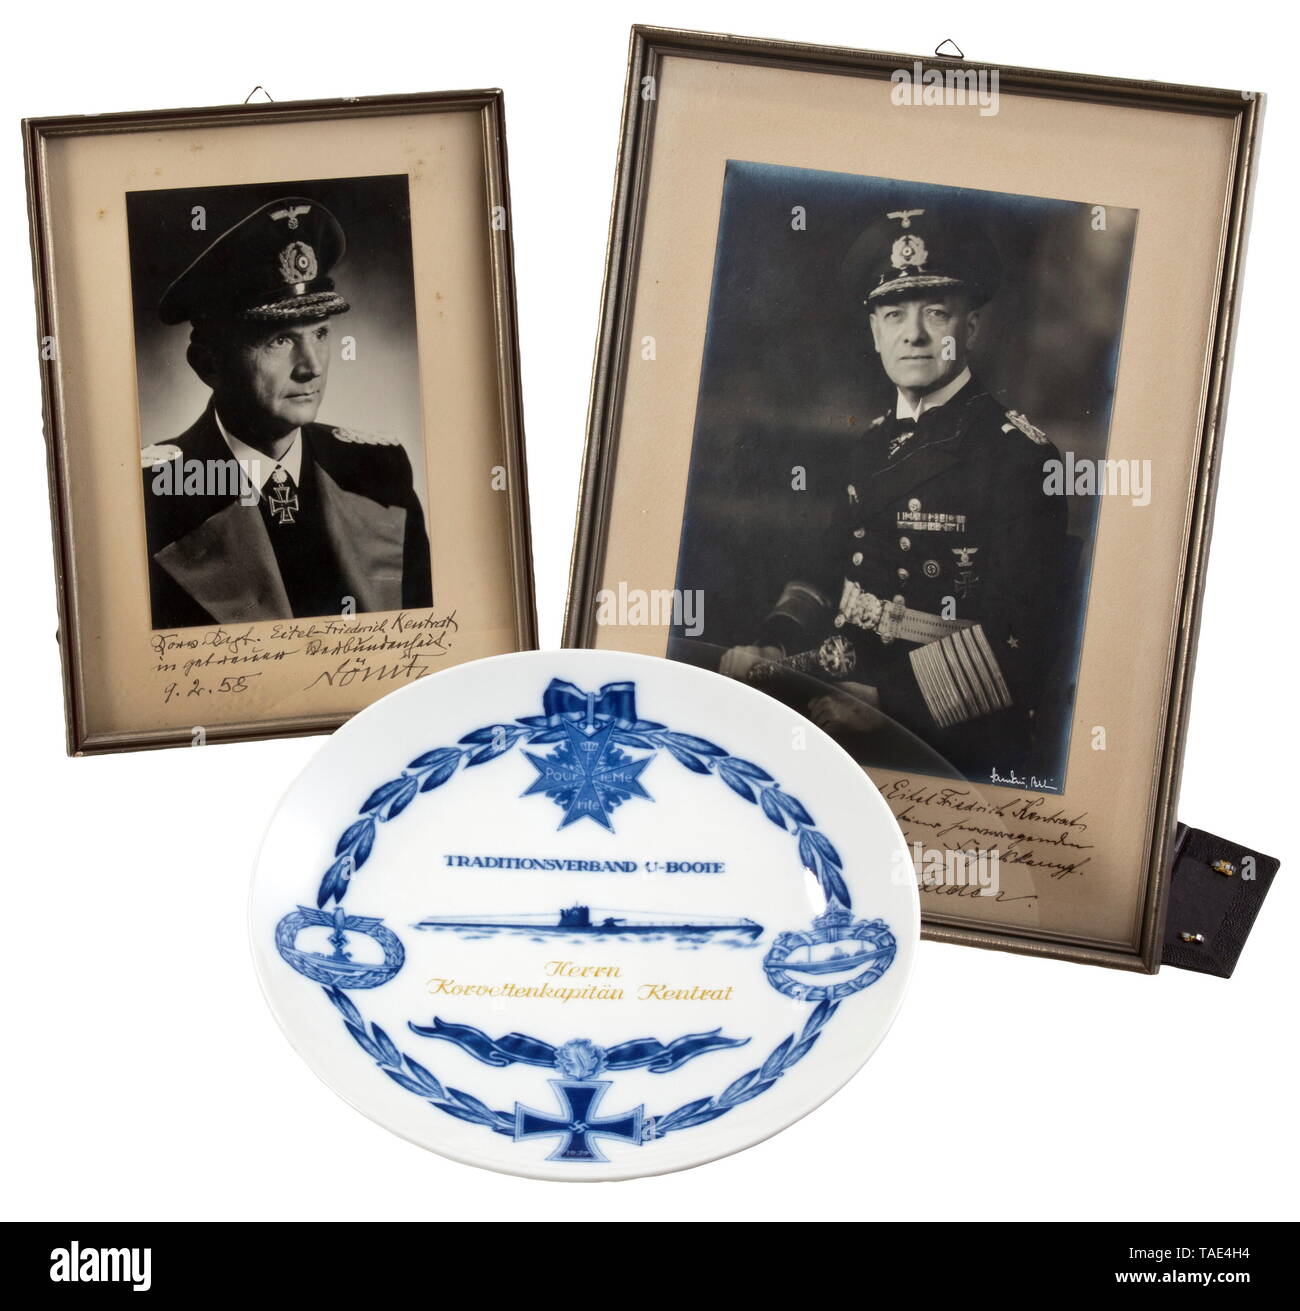 Knight's Cross bearer, corvette captain and commander of U-74 Eitel-Friedrich Kentrat - an honour plate of the U-Boat Force on the award of the Knight's Cross and an inscribed portrait from Erich Raeder White glazed porcelain plate manufactured by Meissen (sword mark), the blue décor depicting the awards of WWI and WWII submarine commanders on a laurel wreath and dedicated in yellow-gold to 'Herrn Korvettenkapitän Kentrat'. Reverse marked with 'N11Z' and the enrolment number '135'. Diameter 25.3 cm. Together with a presentation portrait with inscription by Großadmiral Raede, Editorial-Use-Only Stock Photo